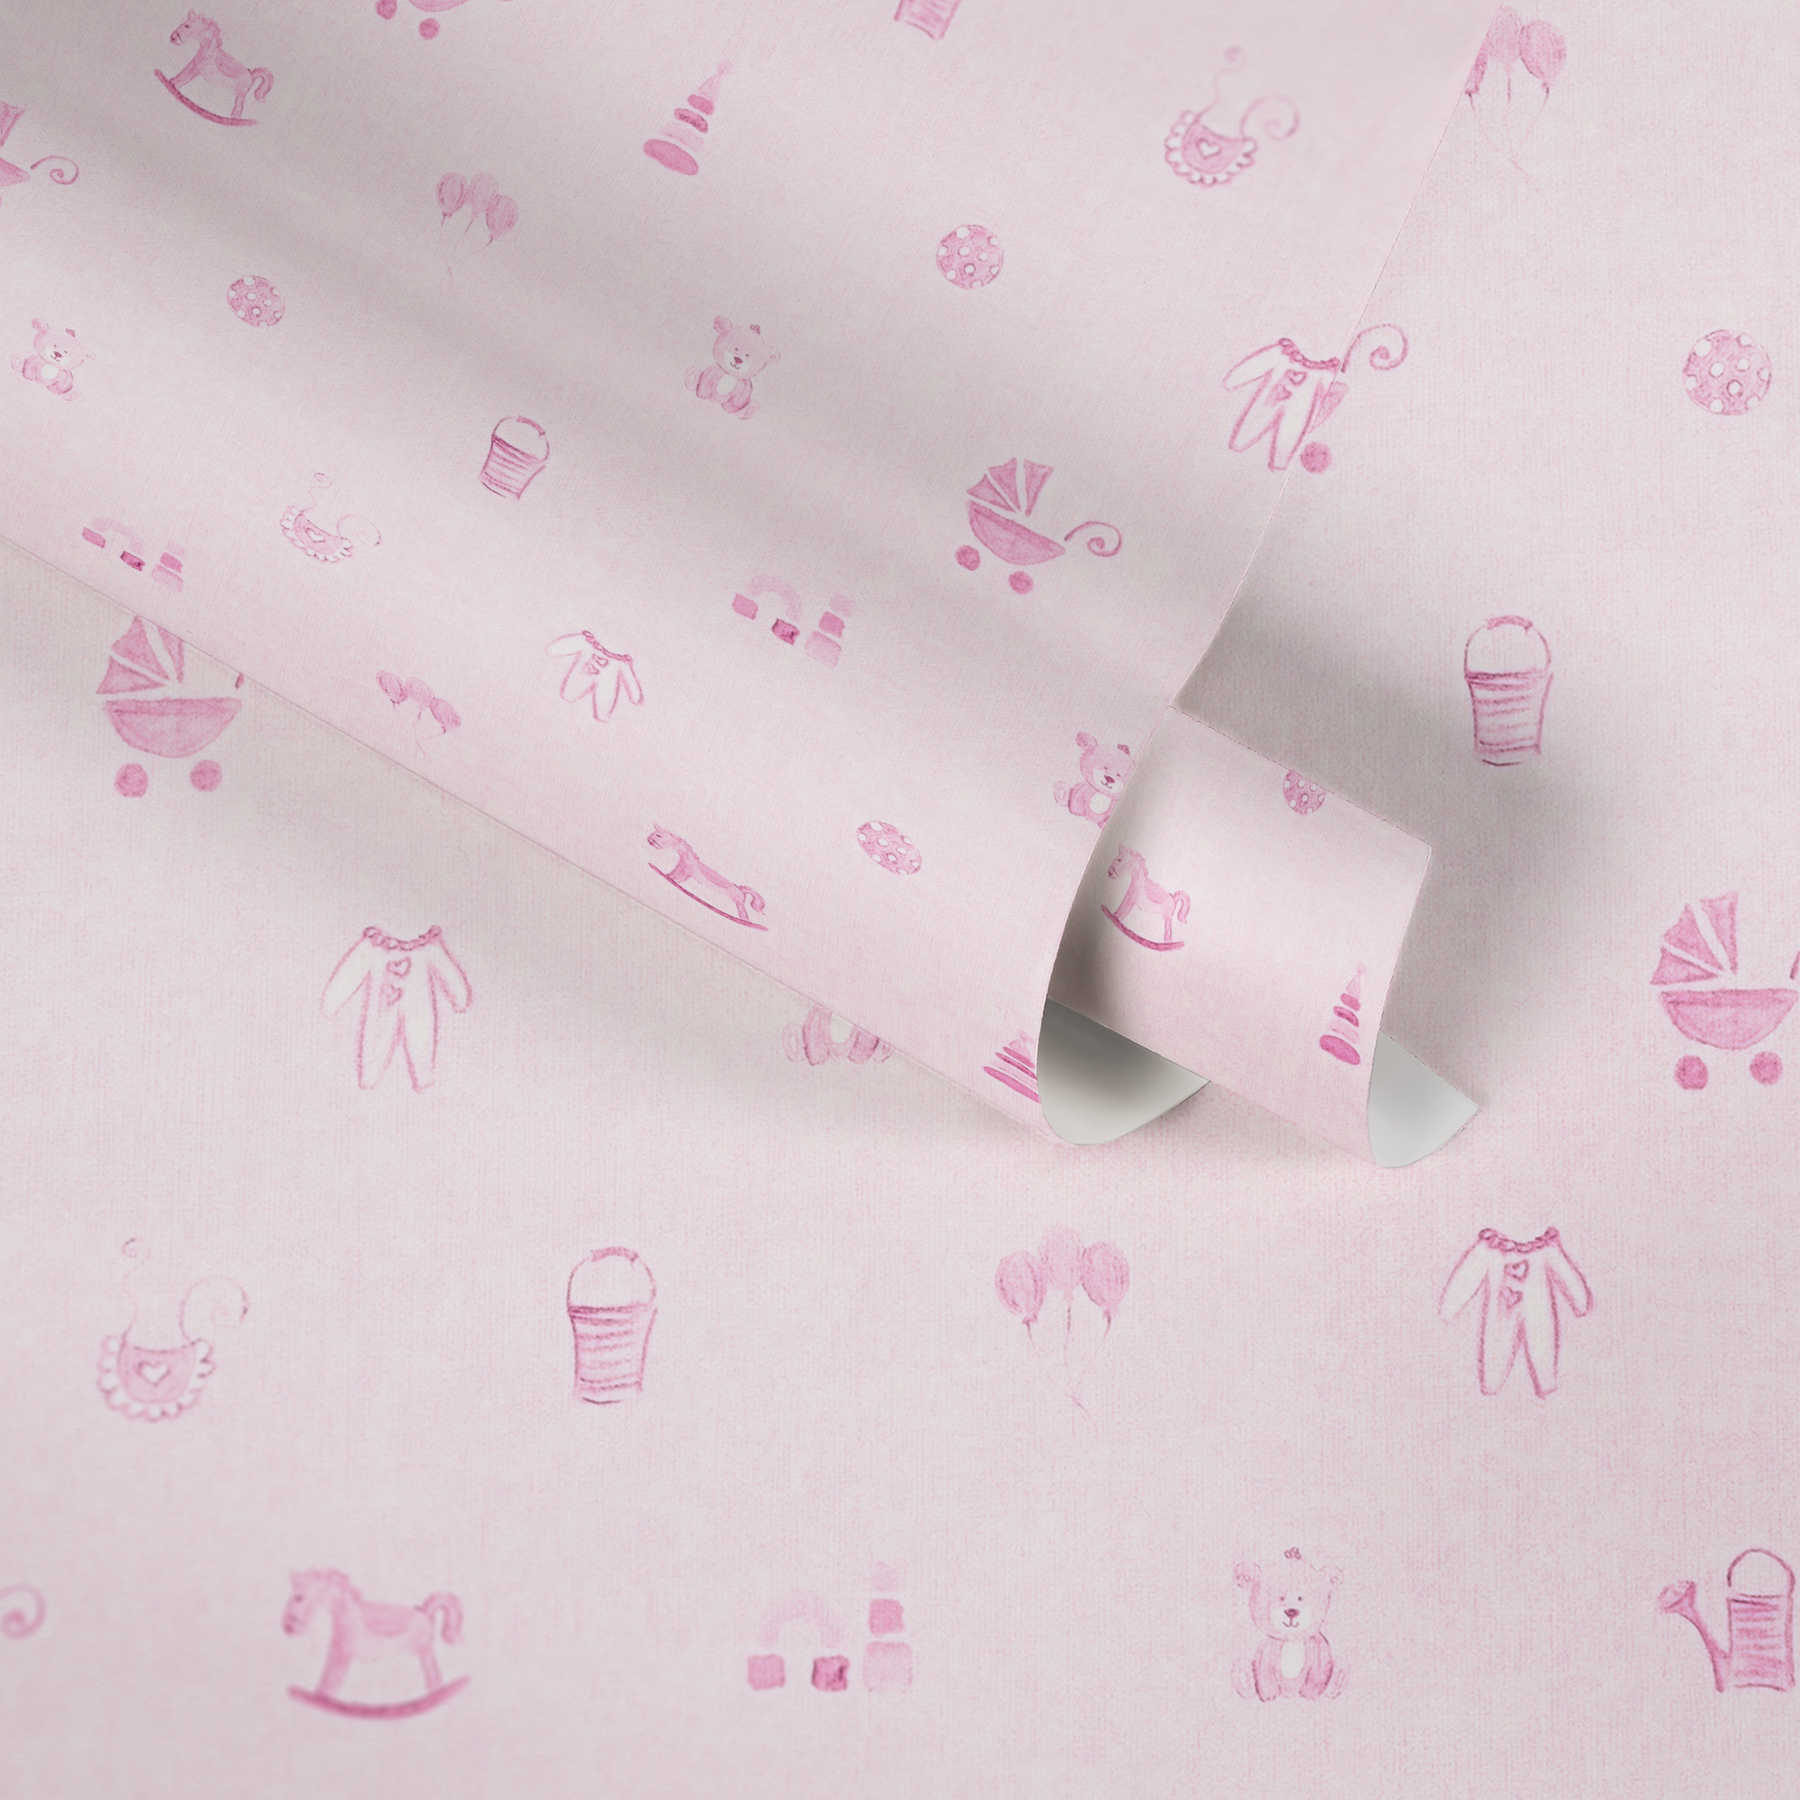             Beautiful baby room wallpaper for girls with pink pattern
        